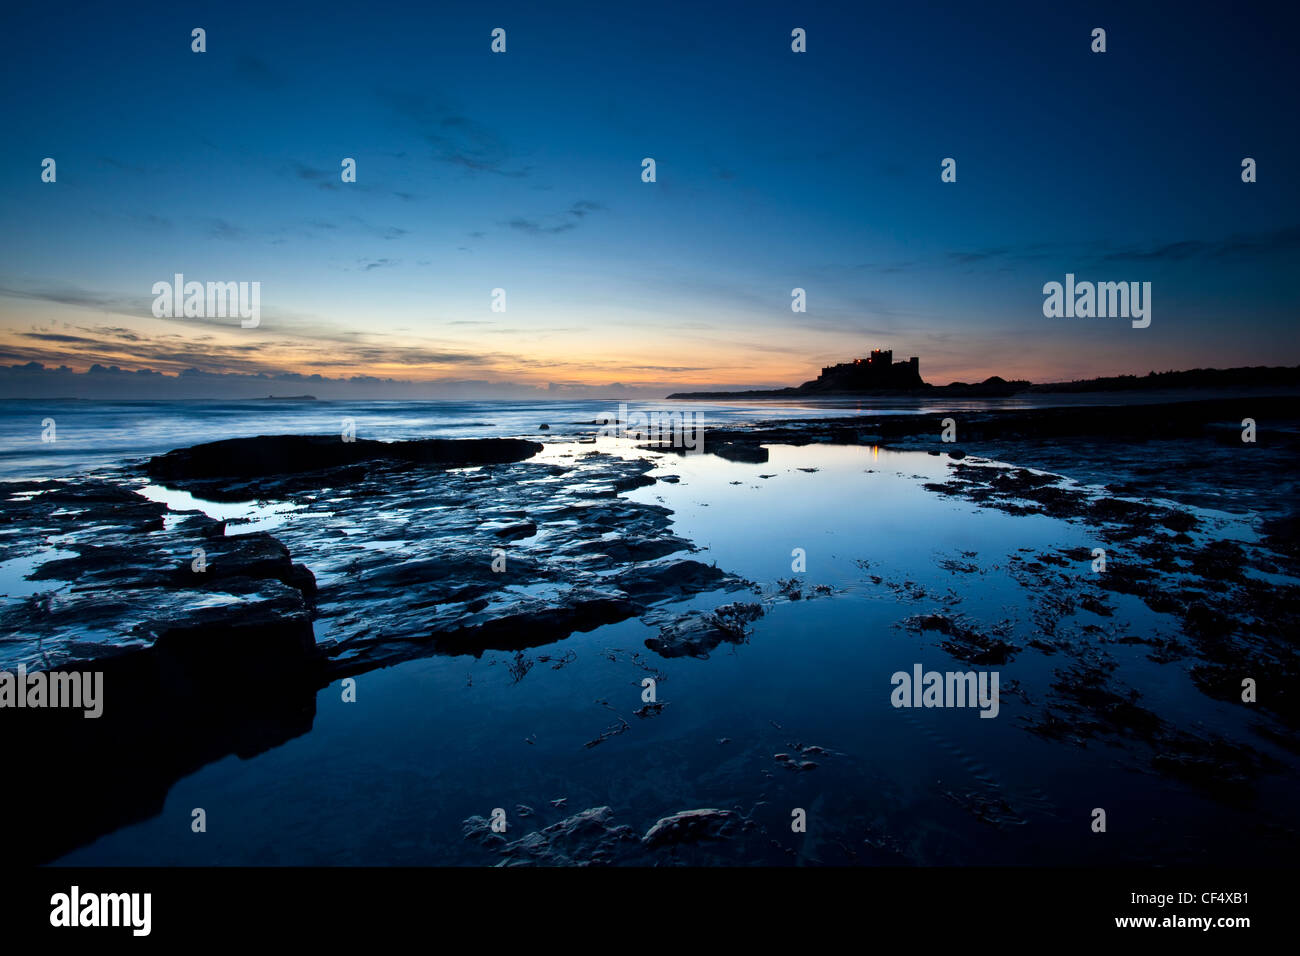 View across the rocky shore towards Bamburgh Castle silhouetted by early dawn light. Stock Photo